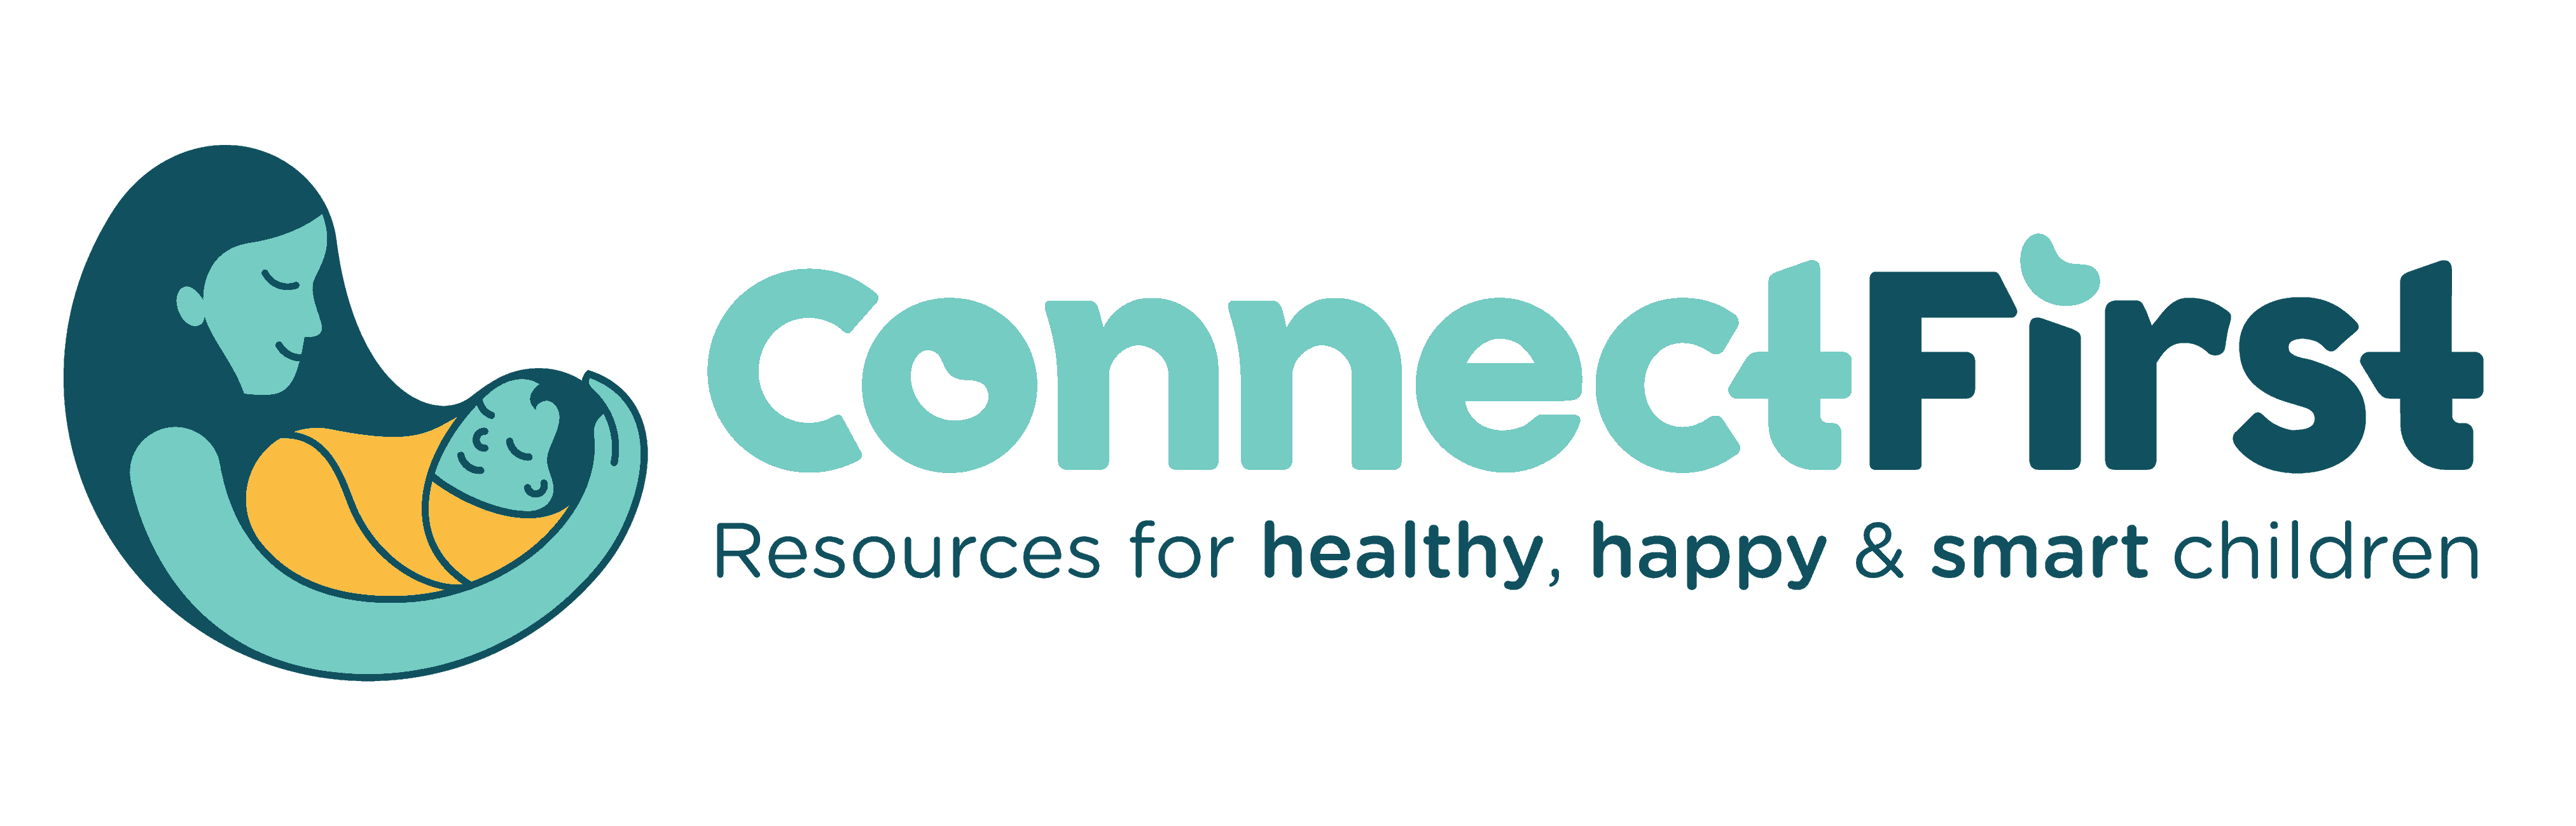 Welcome to ConnectFirst - Connect First